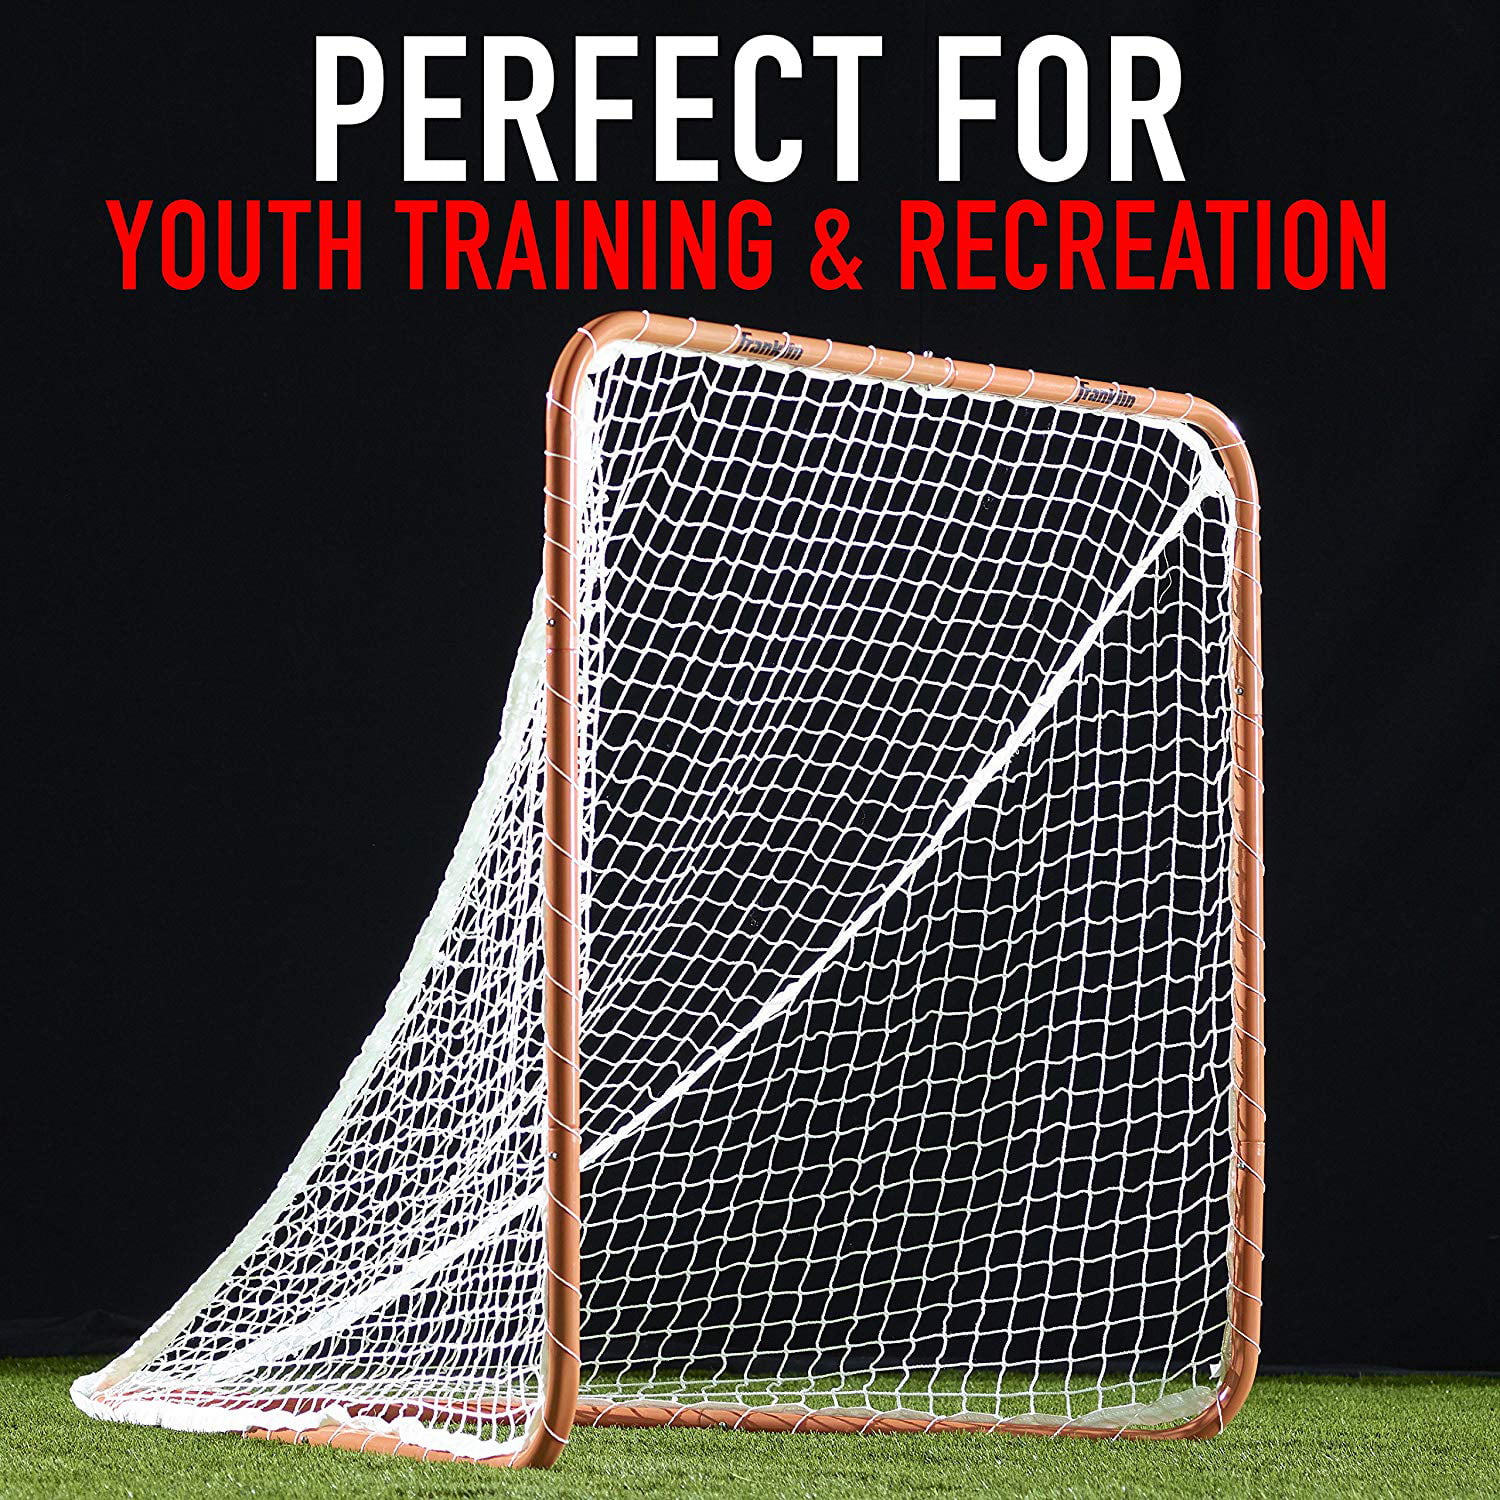 Lacrosse Training Equipment Perfect for Youth Training & Recreation Franklin Sports Backyard Lacrosse Goal Kids Lacrosse Training Net 